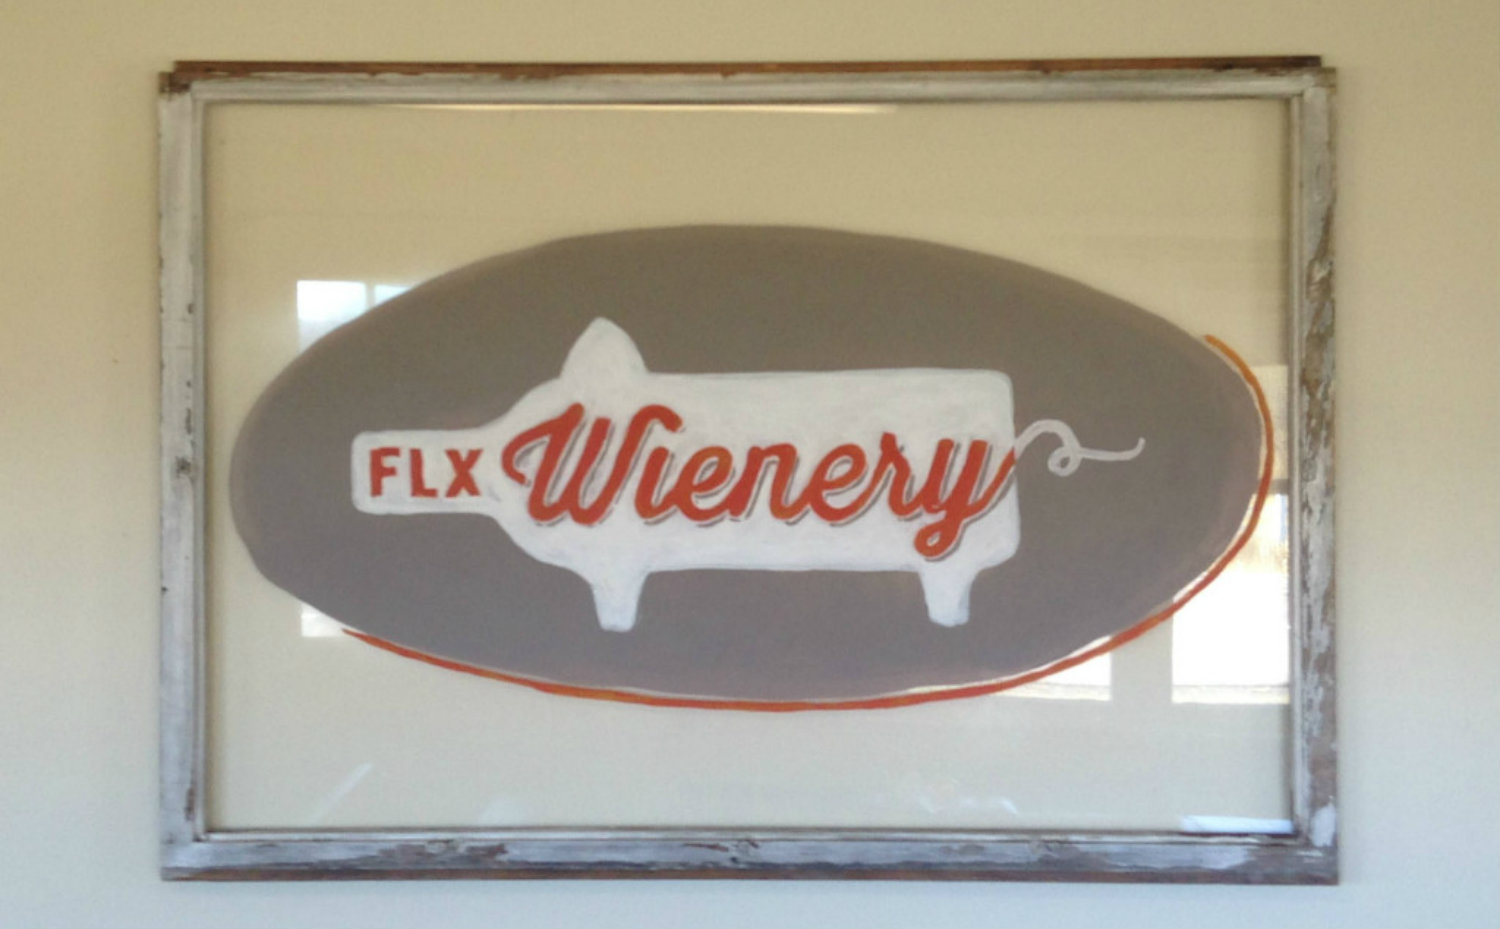 FLX Wienery in Dundee, NY - Featured Image